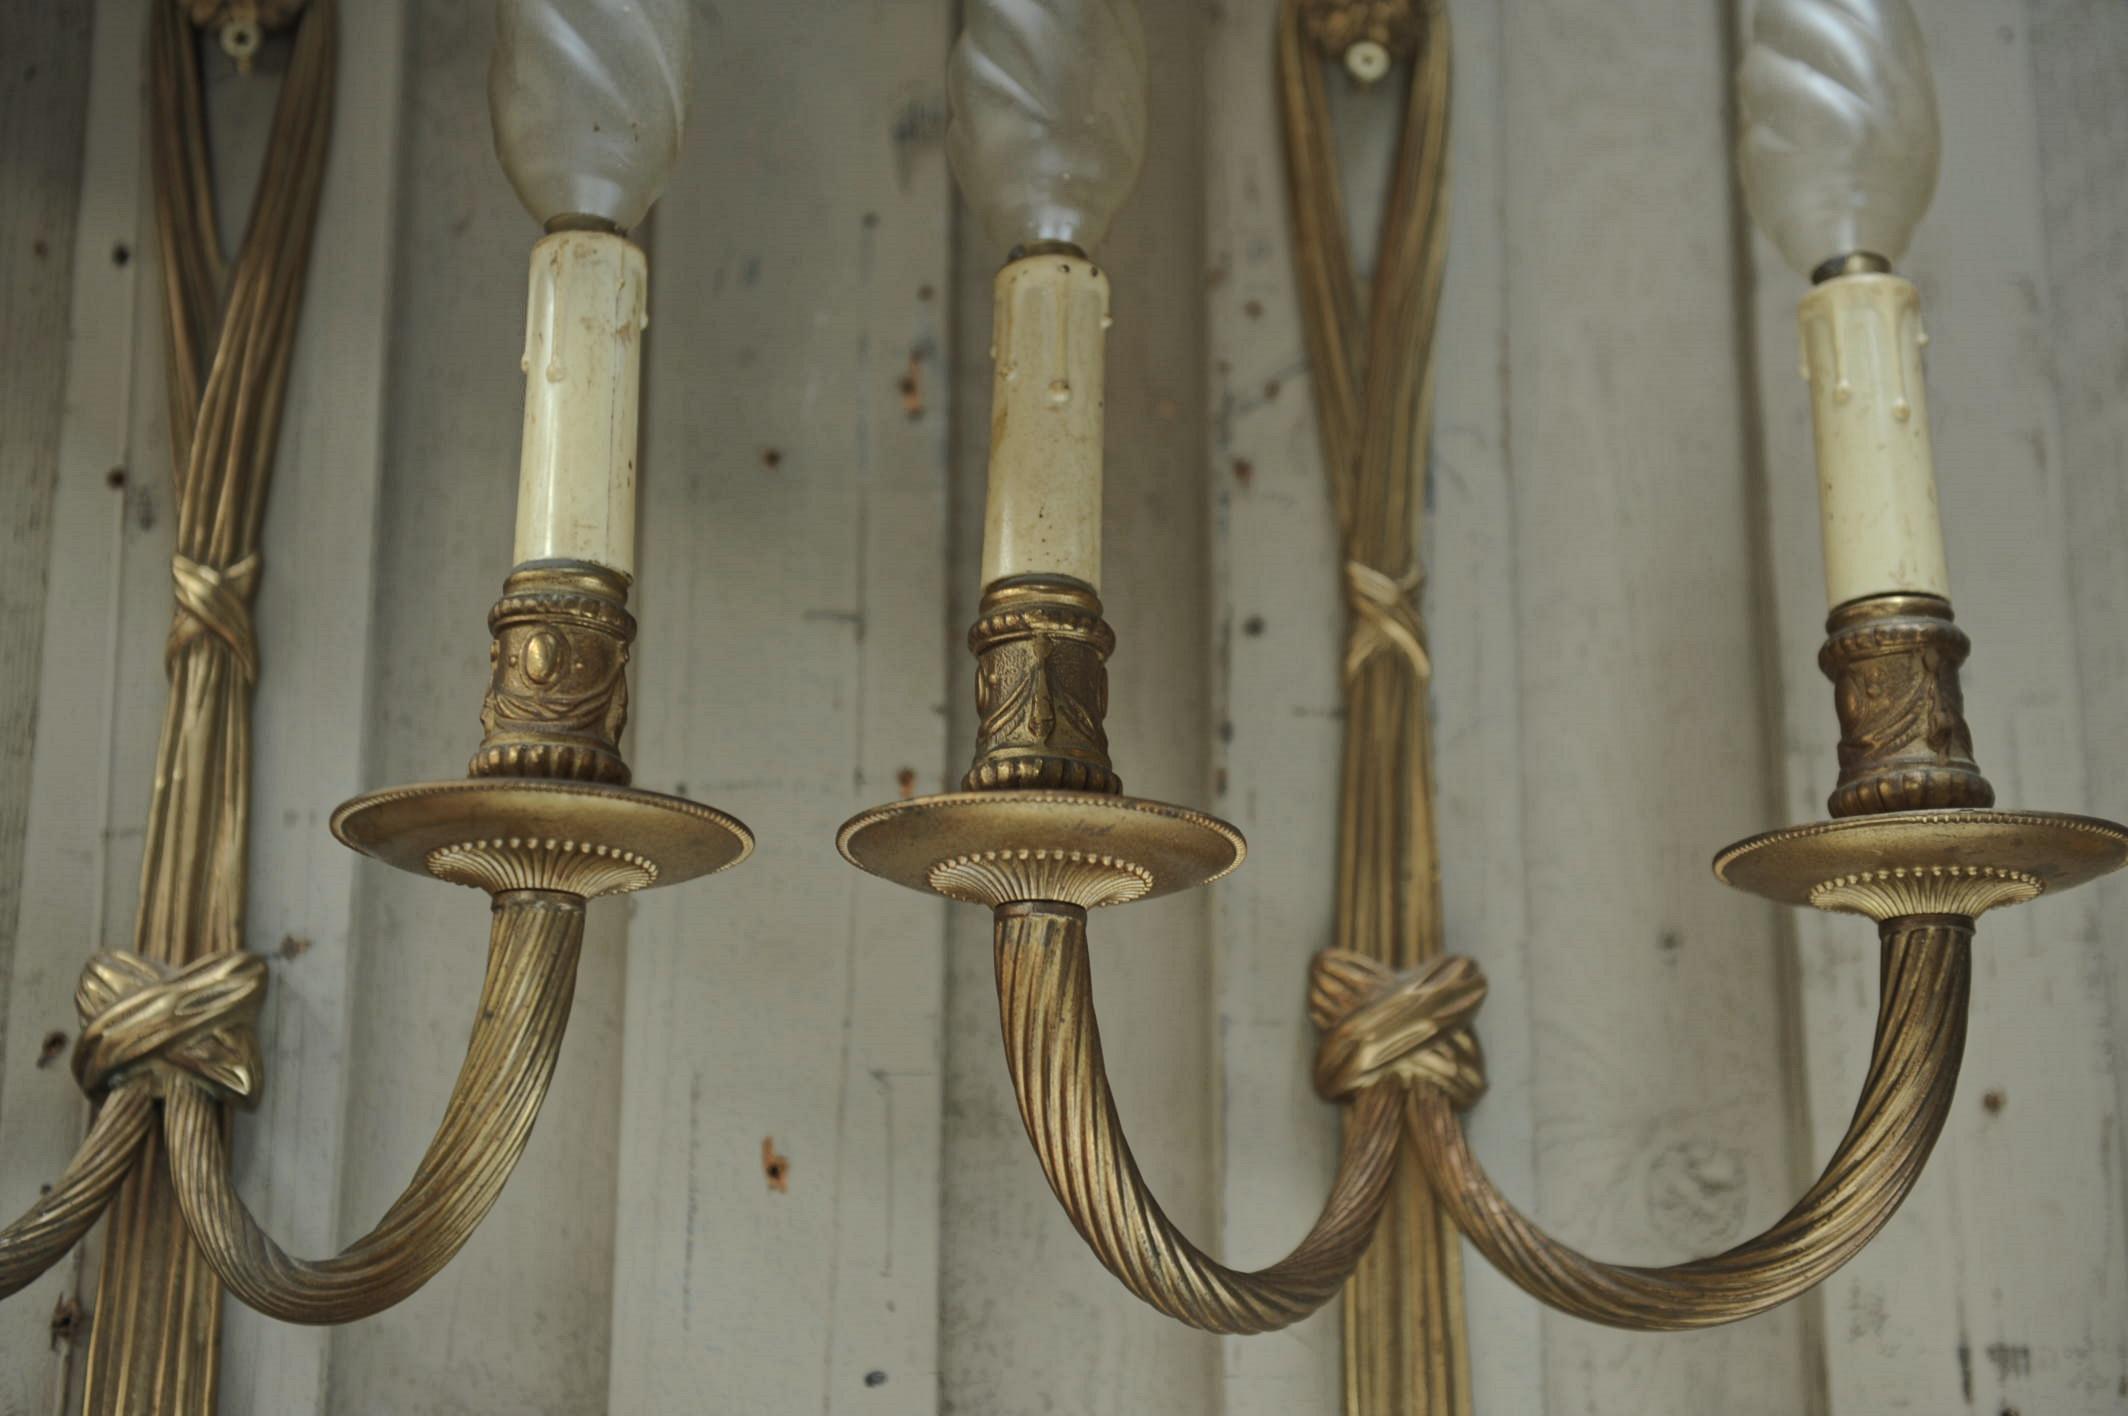 Pair of French Louis XVI style bronze wall sconces circa 1920 very good condition.